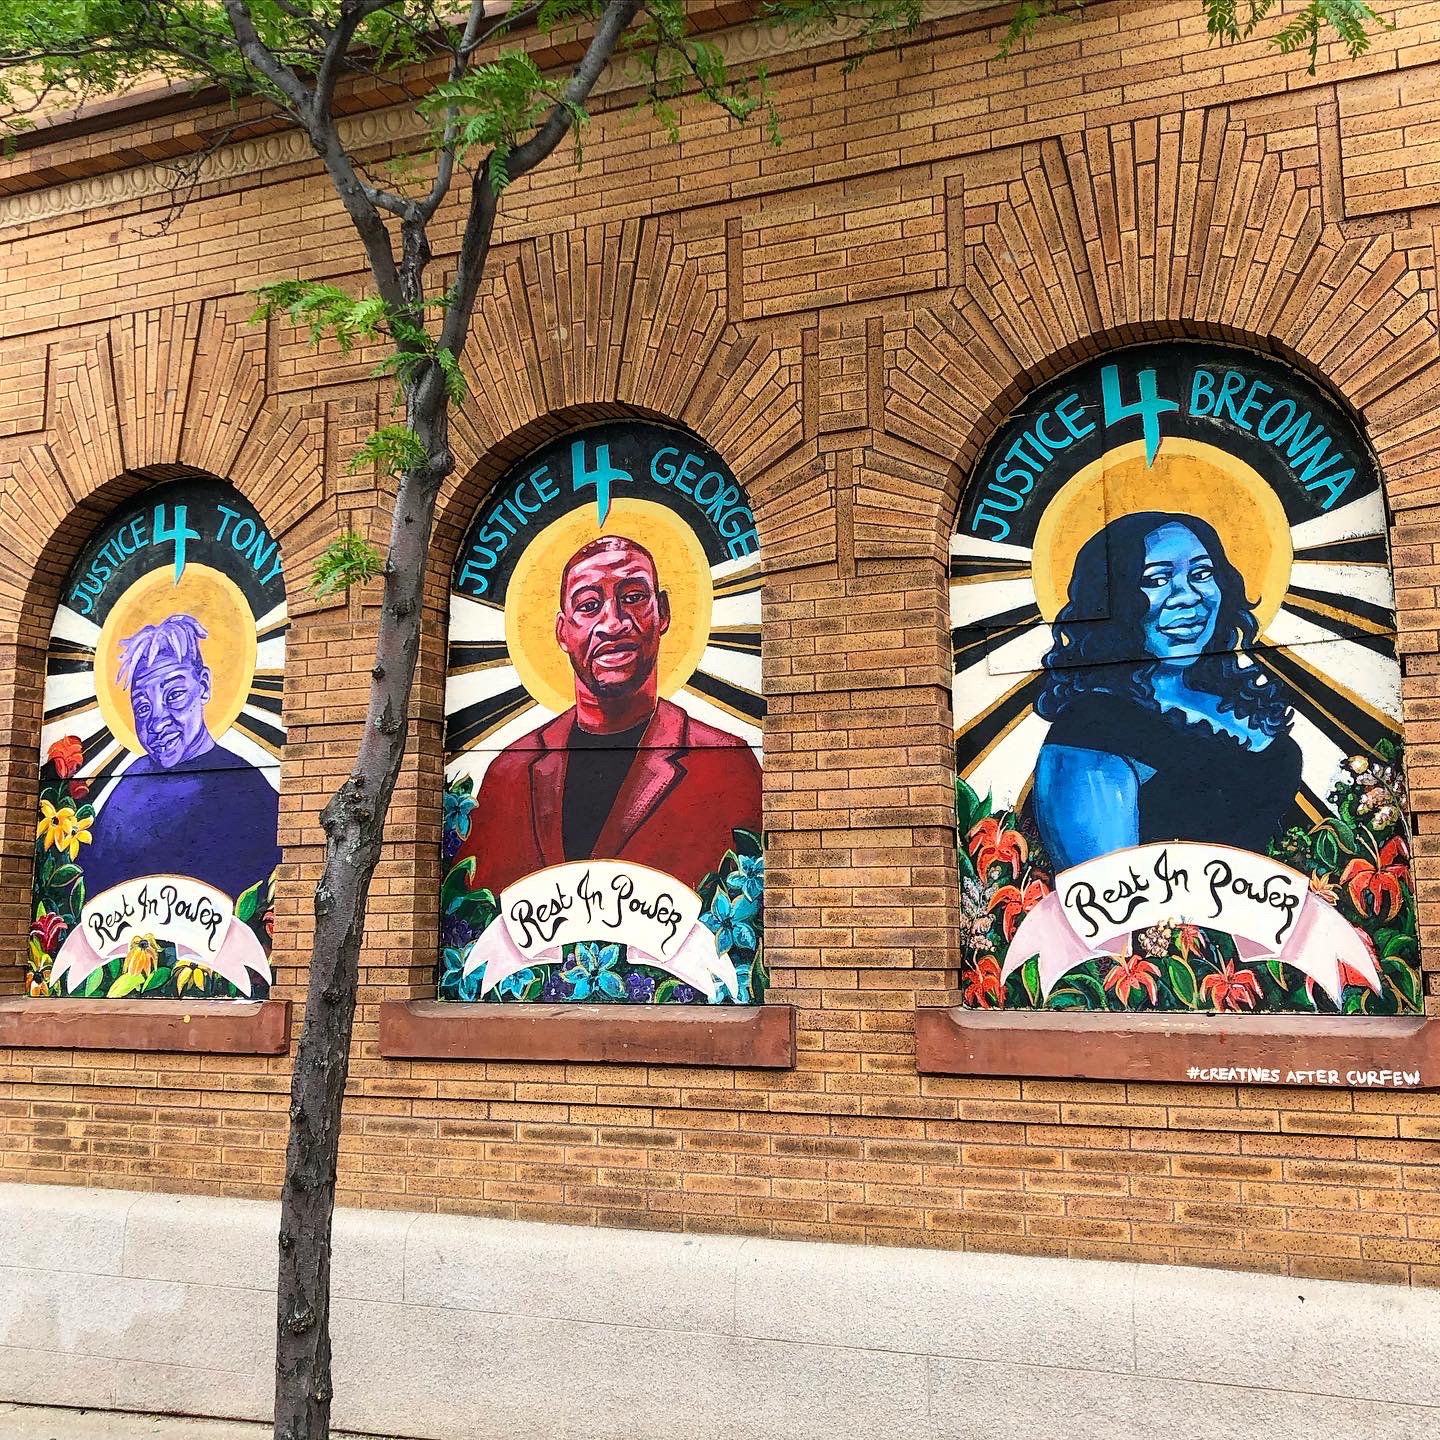 A mural in Minneapolis, Minnesota depicting three Black Americans who were killed by police officers in 2020: George Floyd, Tony McDade, and Breonna Taylor. This mural was painted by Leslie Barlow as part of the Creatives After Curfew program organized by Leslie Barlow, Studio 400, and Public Functionary.